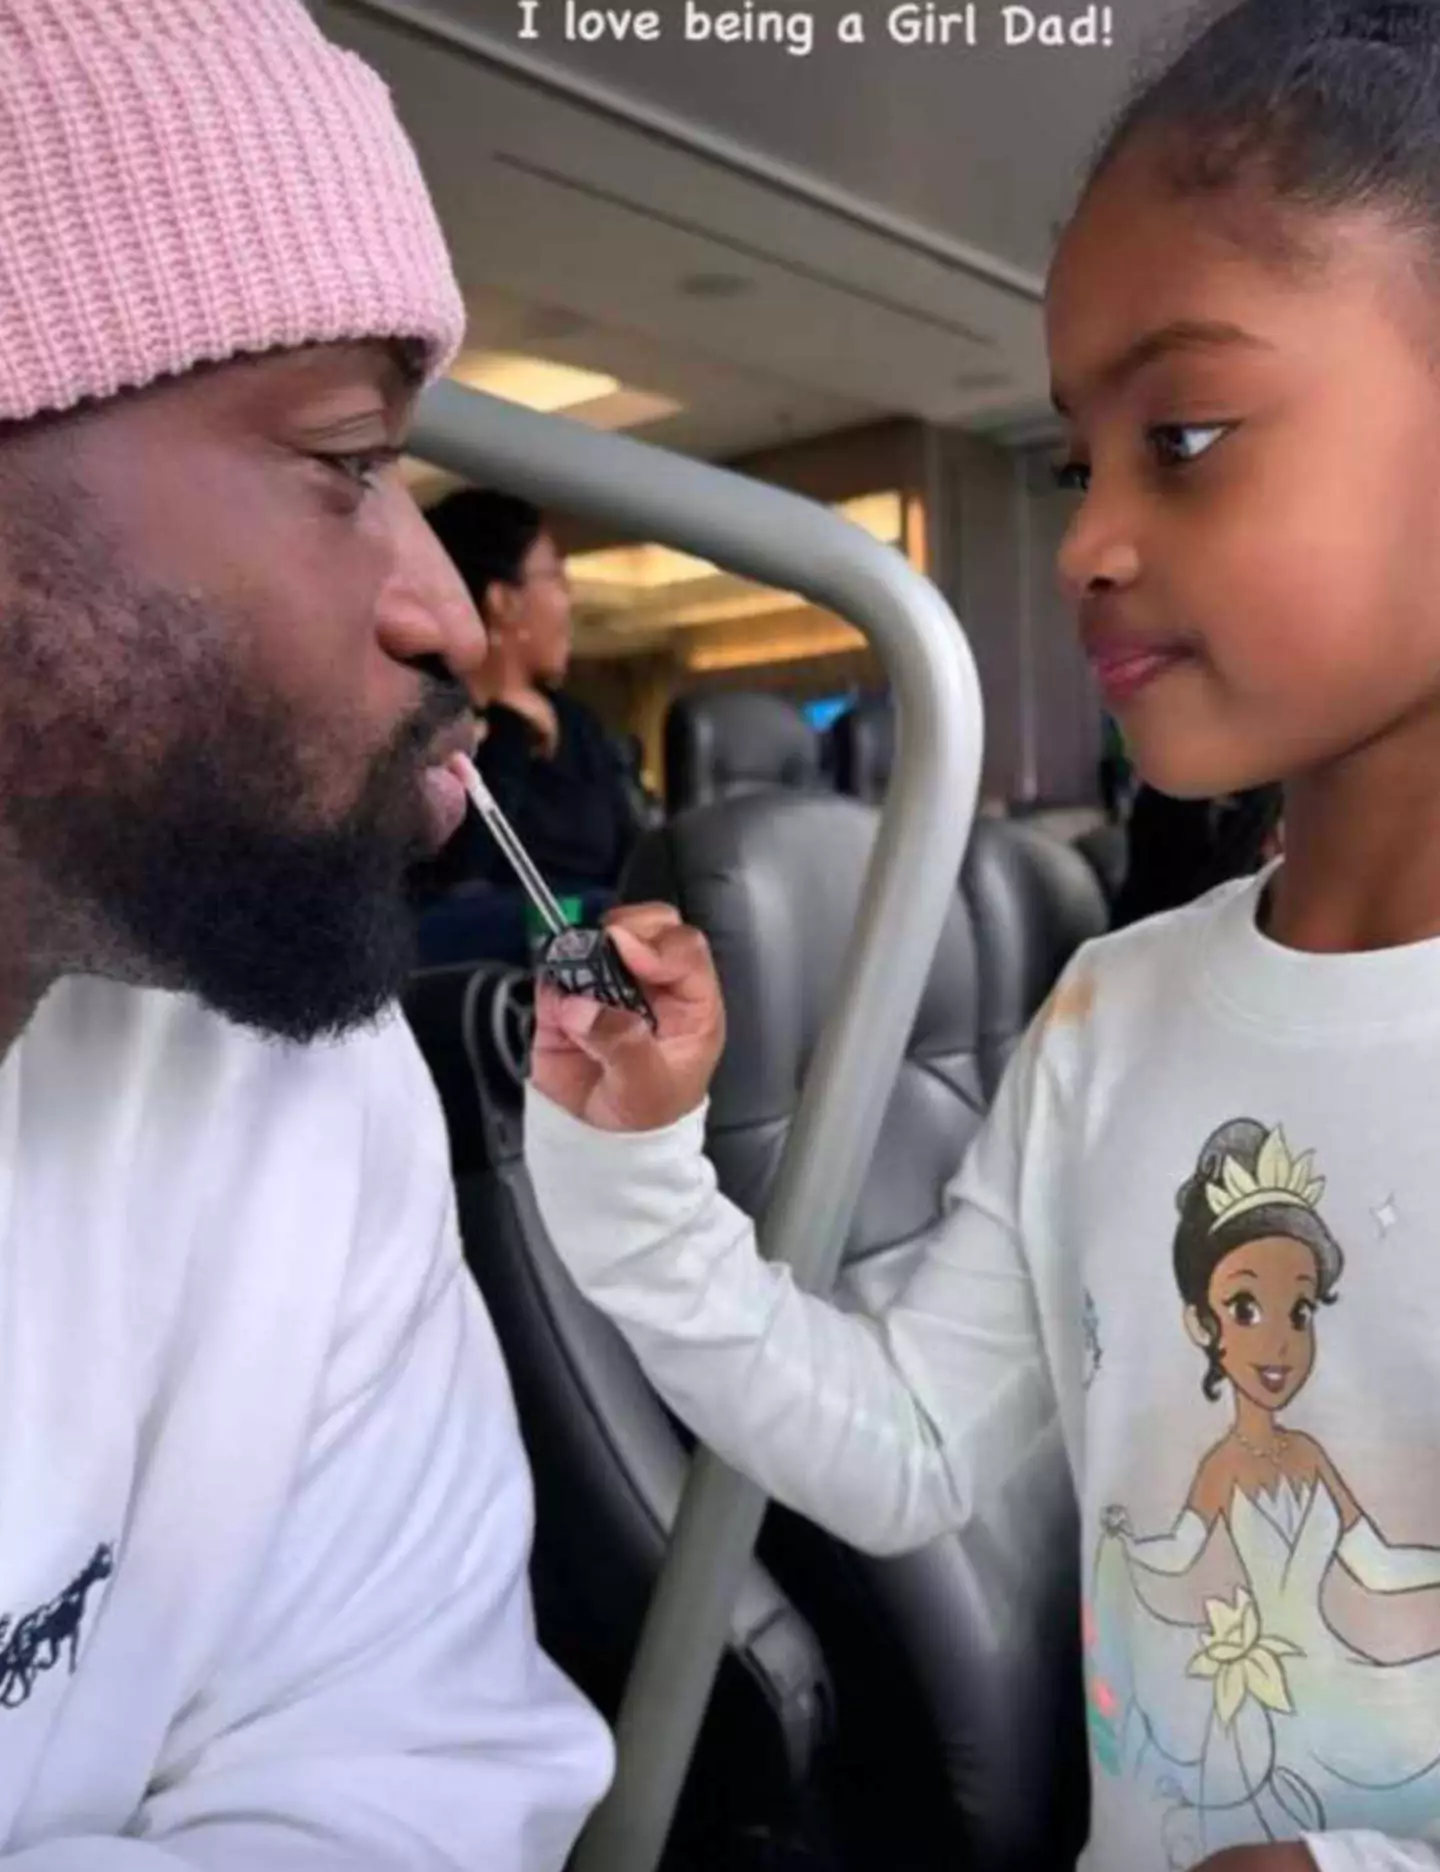 The NBA legend let his daughter give him a makeover.